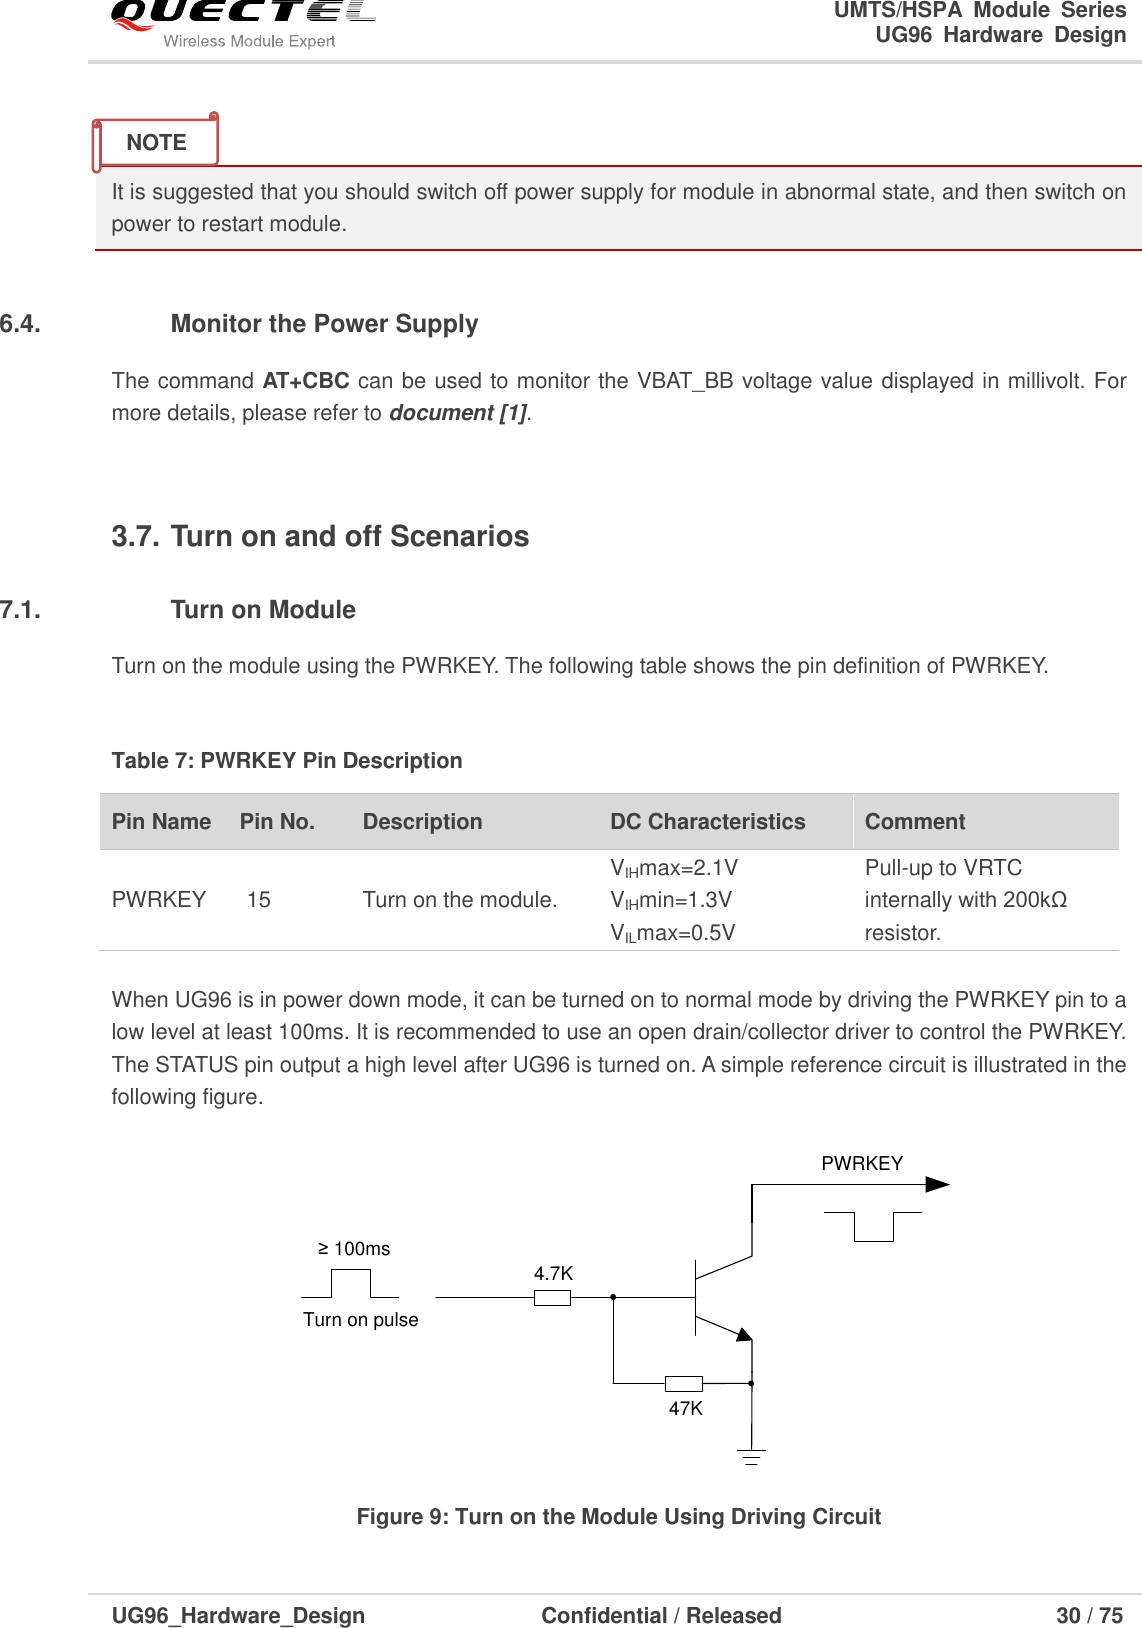                                                                        UMTS/HSPA  Module  Series                                                                 UG96  Hardware  Design  UG96_Hardware_Design                  Confidential / Released                             30 / 75     It is suggested that you should switch off power supply for module in abnormal state, and then switch on power to restart module.  3.6.4.  Monitor the Power Supply The command AT+CBC can be used to monitor the VBAT_BB voltage value displayed in millivolt. For more details, please refer to document [1].    3.7. Turn on and off Scenarios 3.7.1.  Turn on Module Turn on the module using the PWRKEY. The following table shows the pin definition of PWRKEY.  Table 7: PWRKEY Pin Description Pin Name   Pin No. Description DC Characteristics Comment PWRKEY 15 Turn on the module. VIHmax=2.1V VIHmin=1.3V VILmax=0.5V Pull-up to VRTC internally with 200kΩ resistor.    When UG96 is in power down mode, it can be turned on to normal mode by driving the PWRKEY pin to a low level at least 100ms. It is recommended to use an open drain/collector driver to control the PWRKEY. The STATUS pin output a high level after UG96 is turned on. A simple reference circuit is illustrated in the following figure.  Turn on pulsePWRKEY4.7K47K≥ 100ms Figure 9: Turn on the Module Using Driving Circuit NOTE 